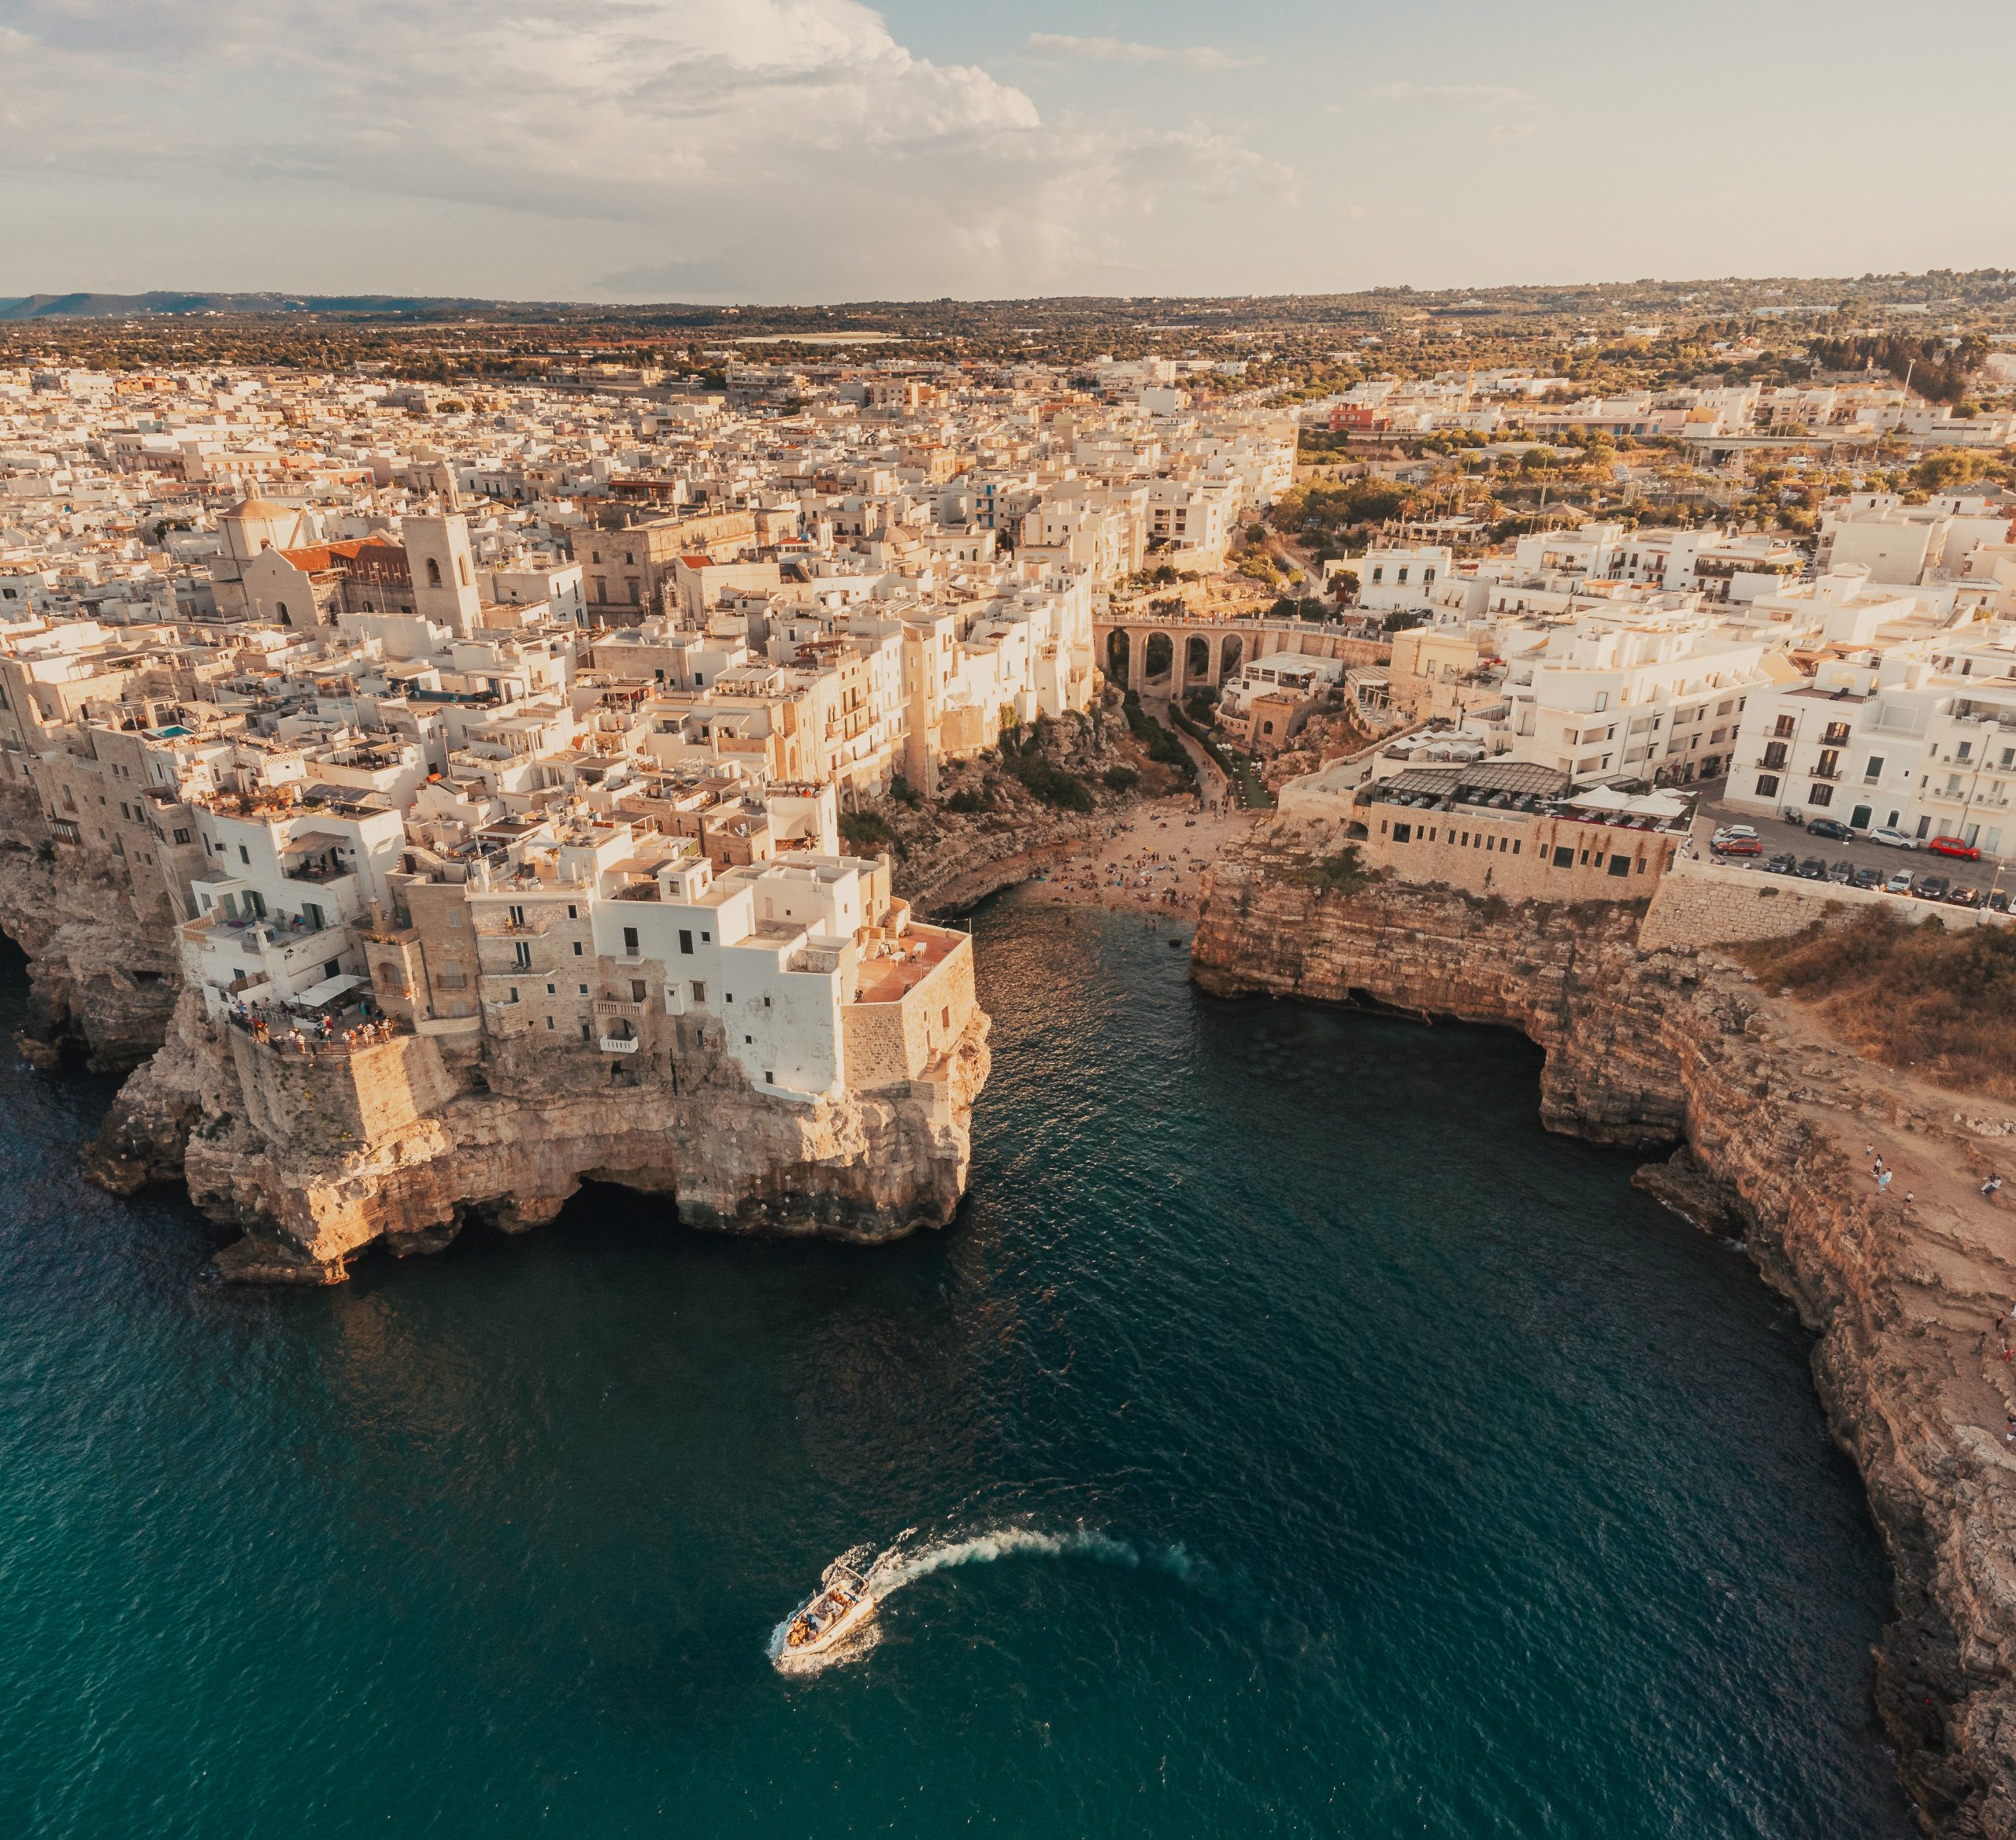 Polignano a Mare - 15 of the Prettiest Towns and Villages in Italy